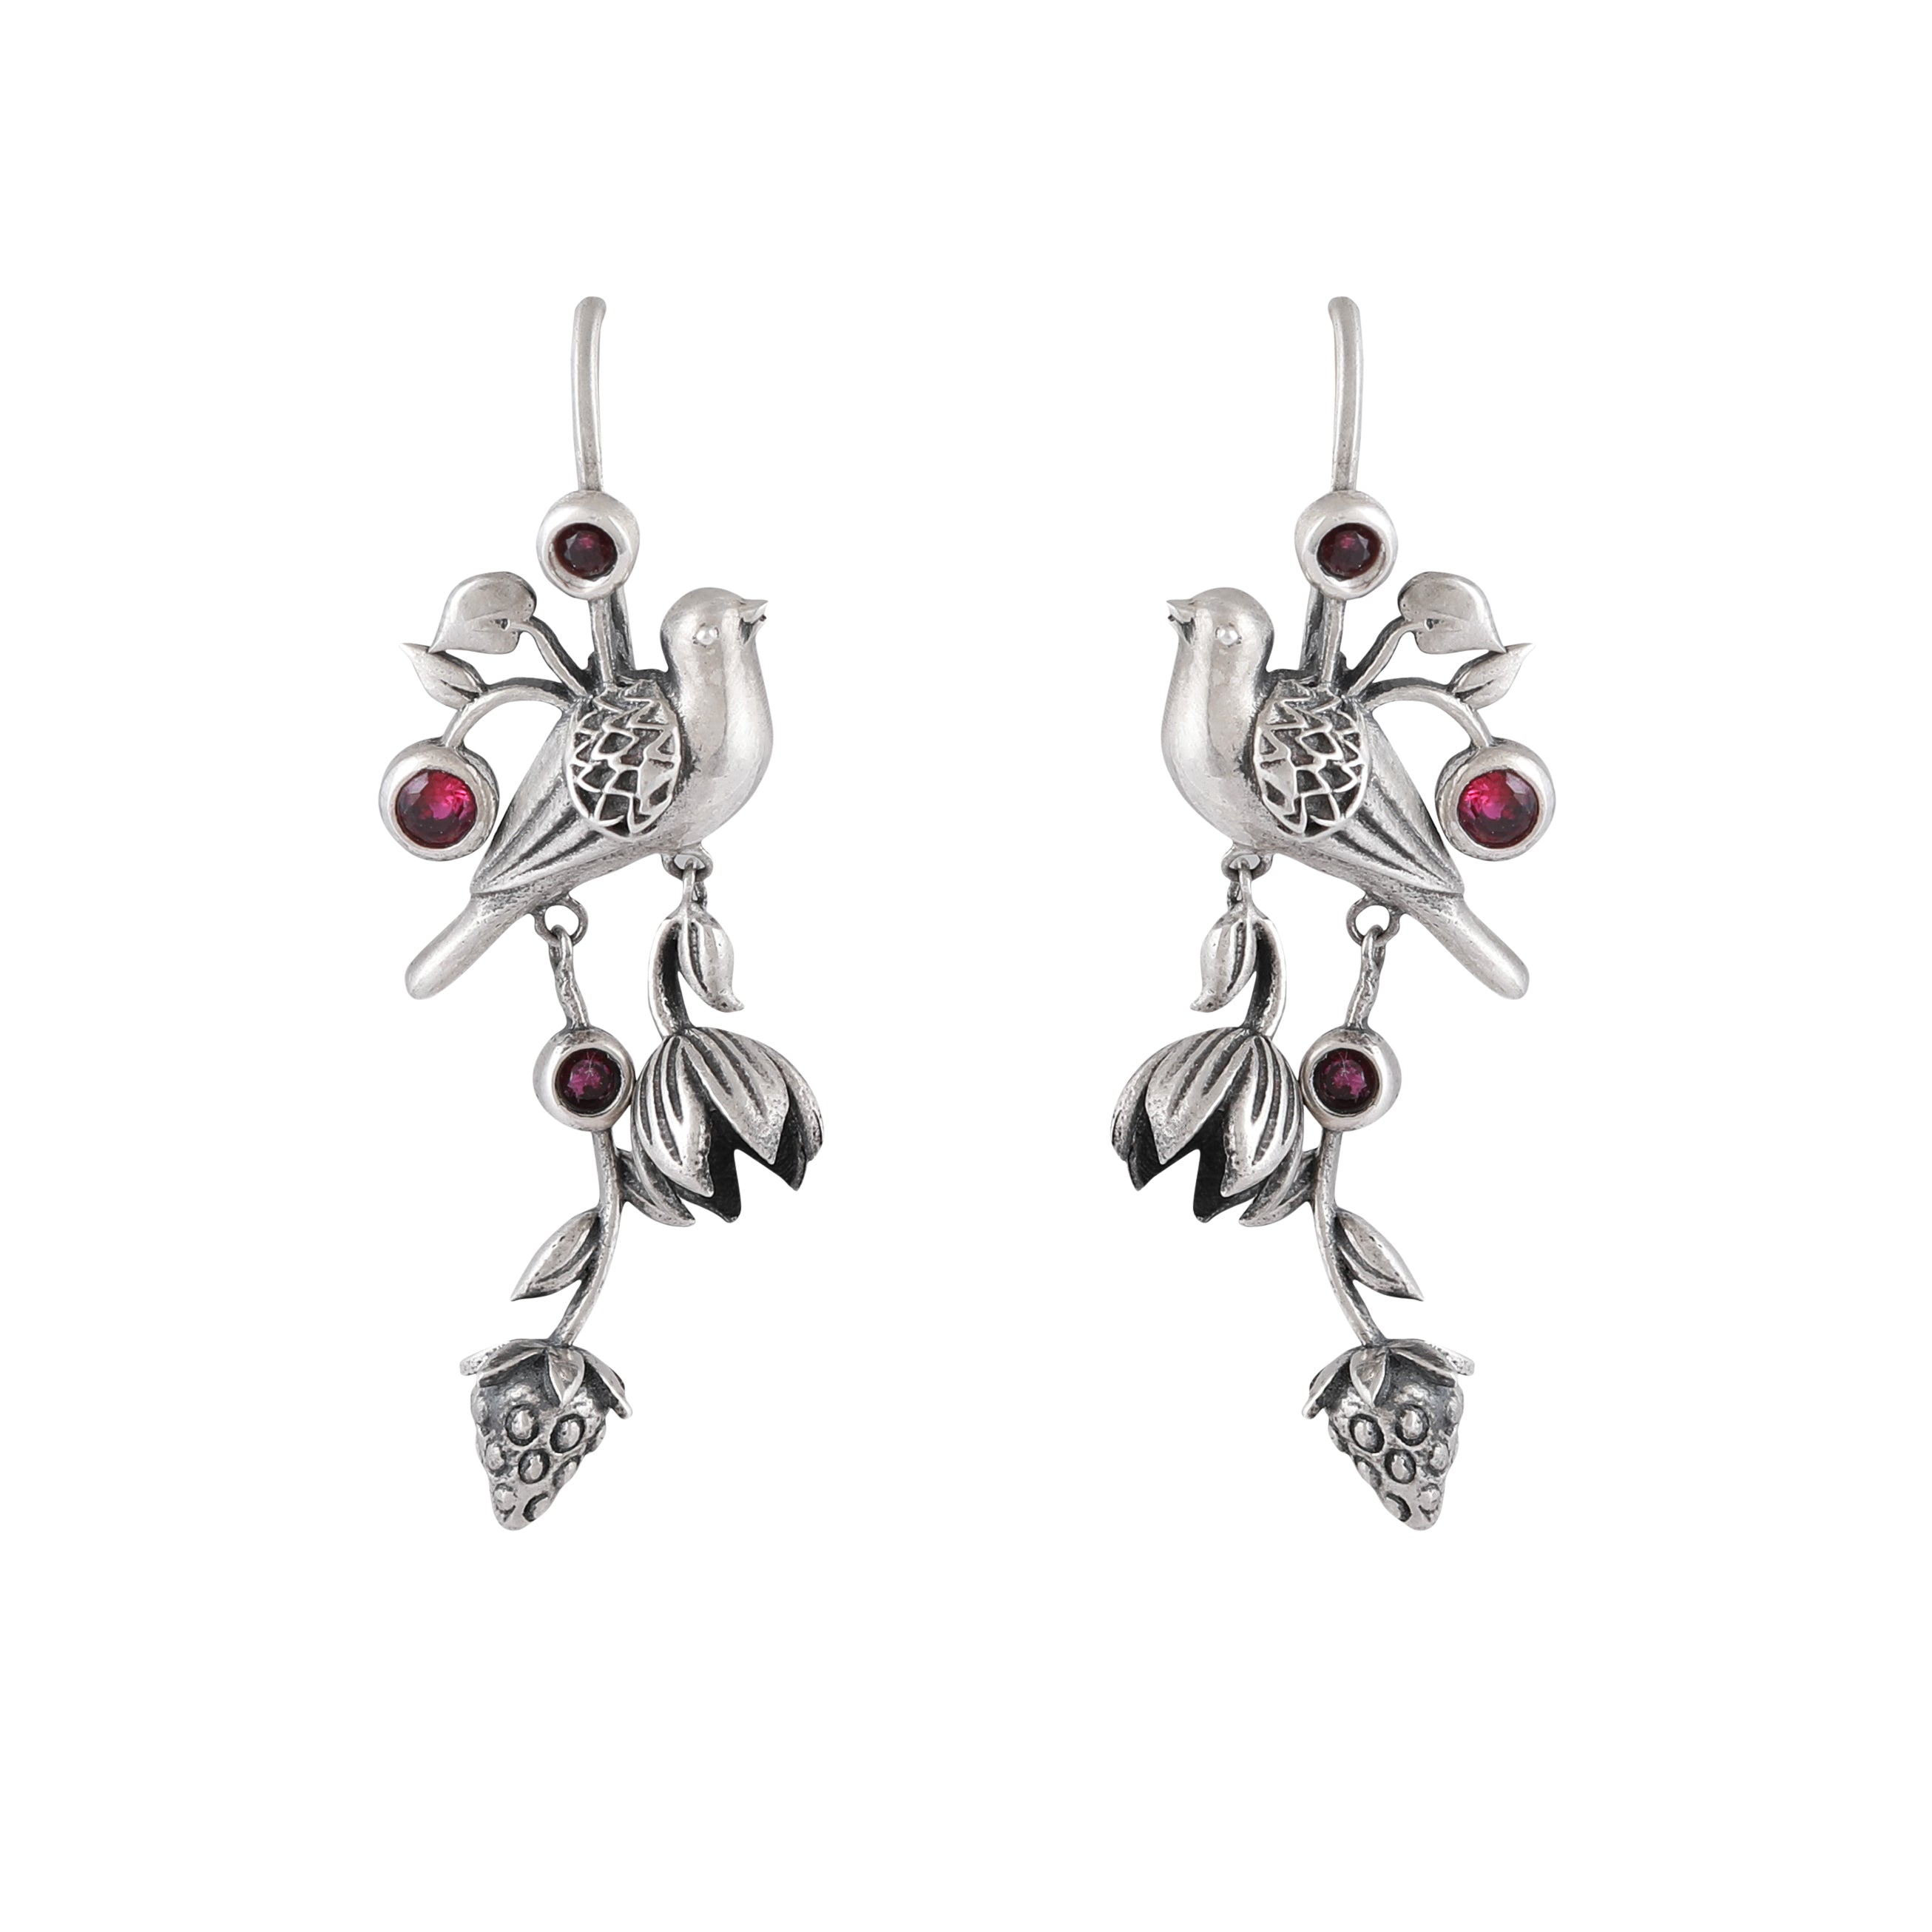 William Morris - Strawberry Thief Silver Earrings by Moha